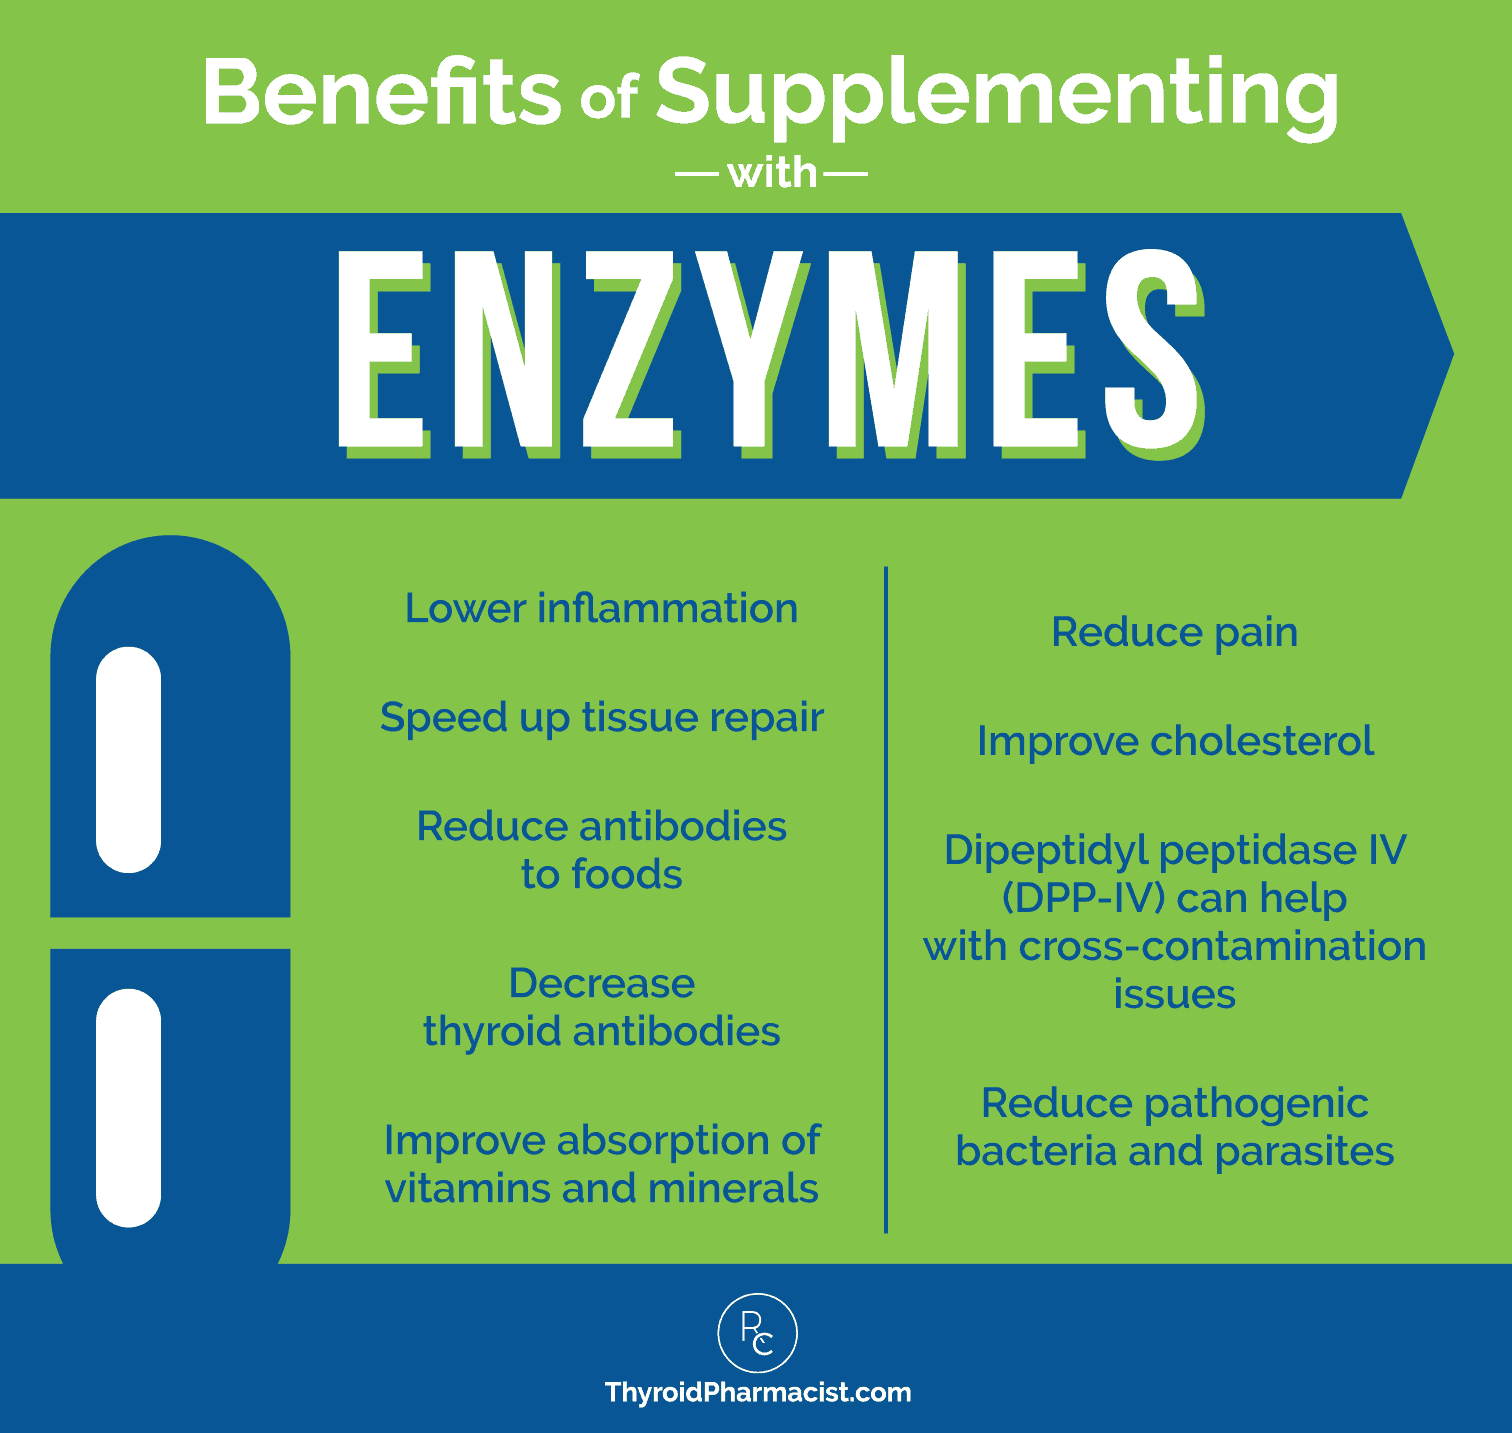 Benefits of Supplementing with Enzymes Infographic